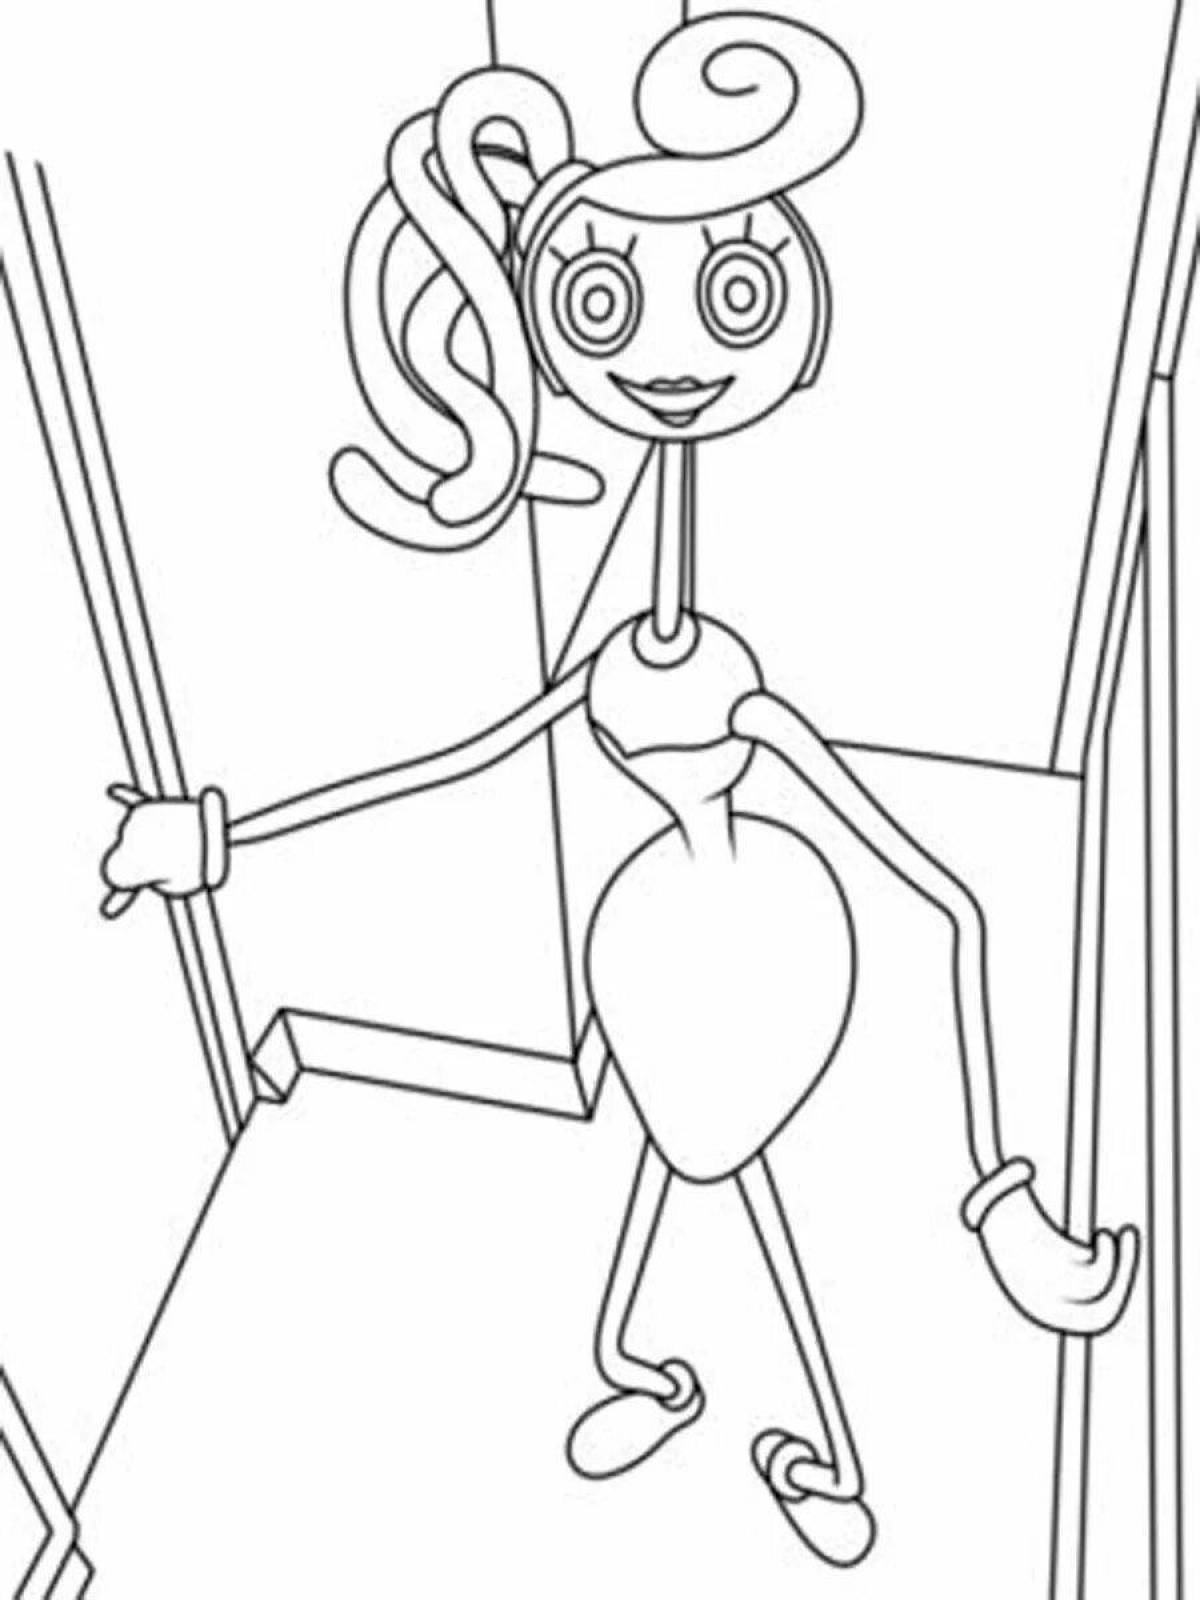 Dad Long Legs Animated Coloring Page